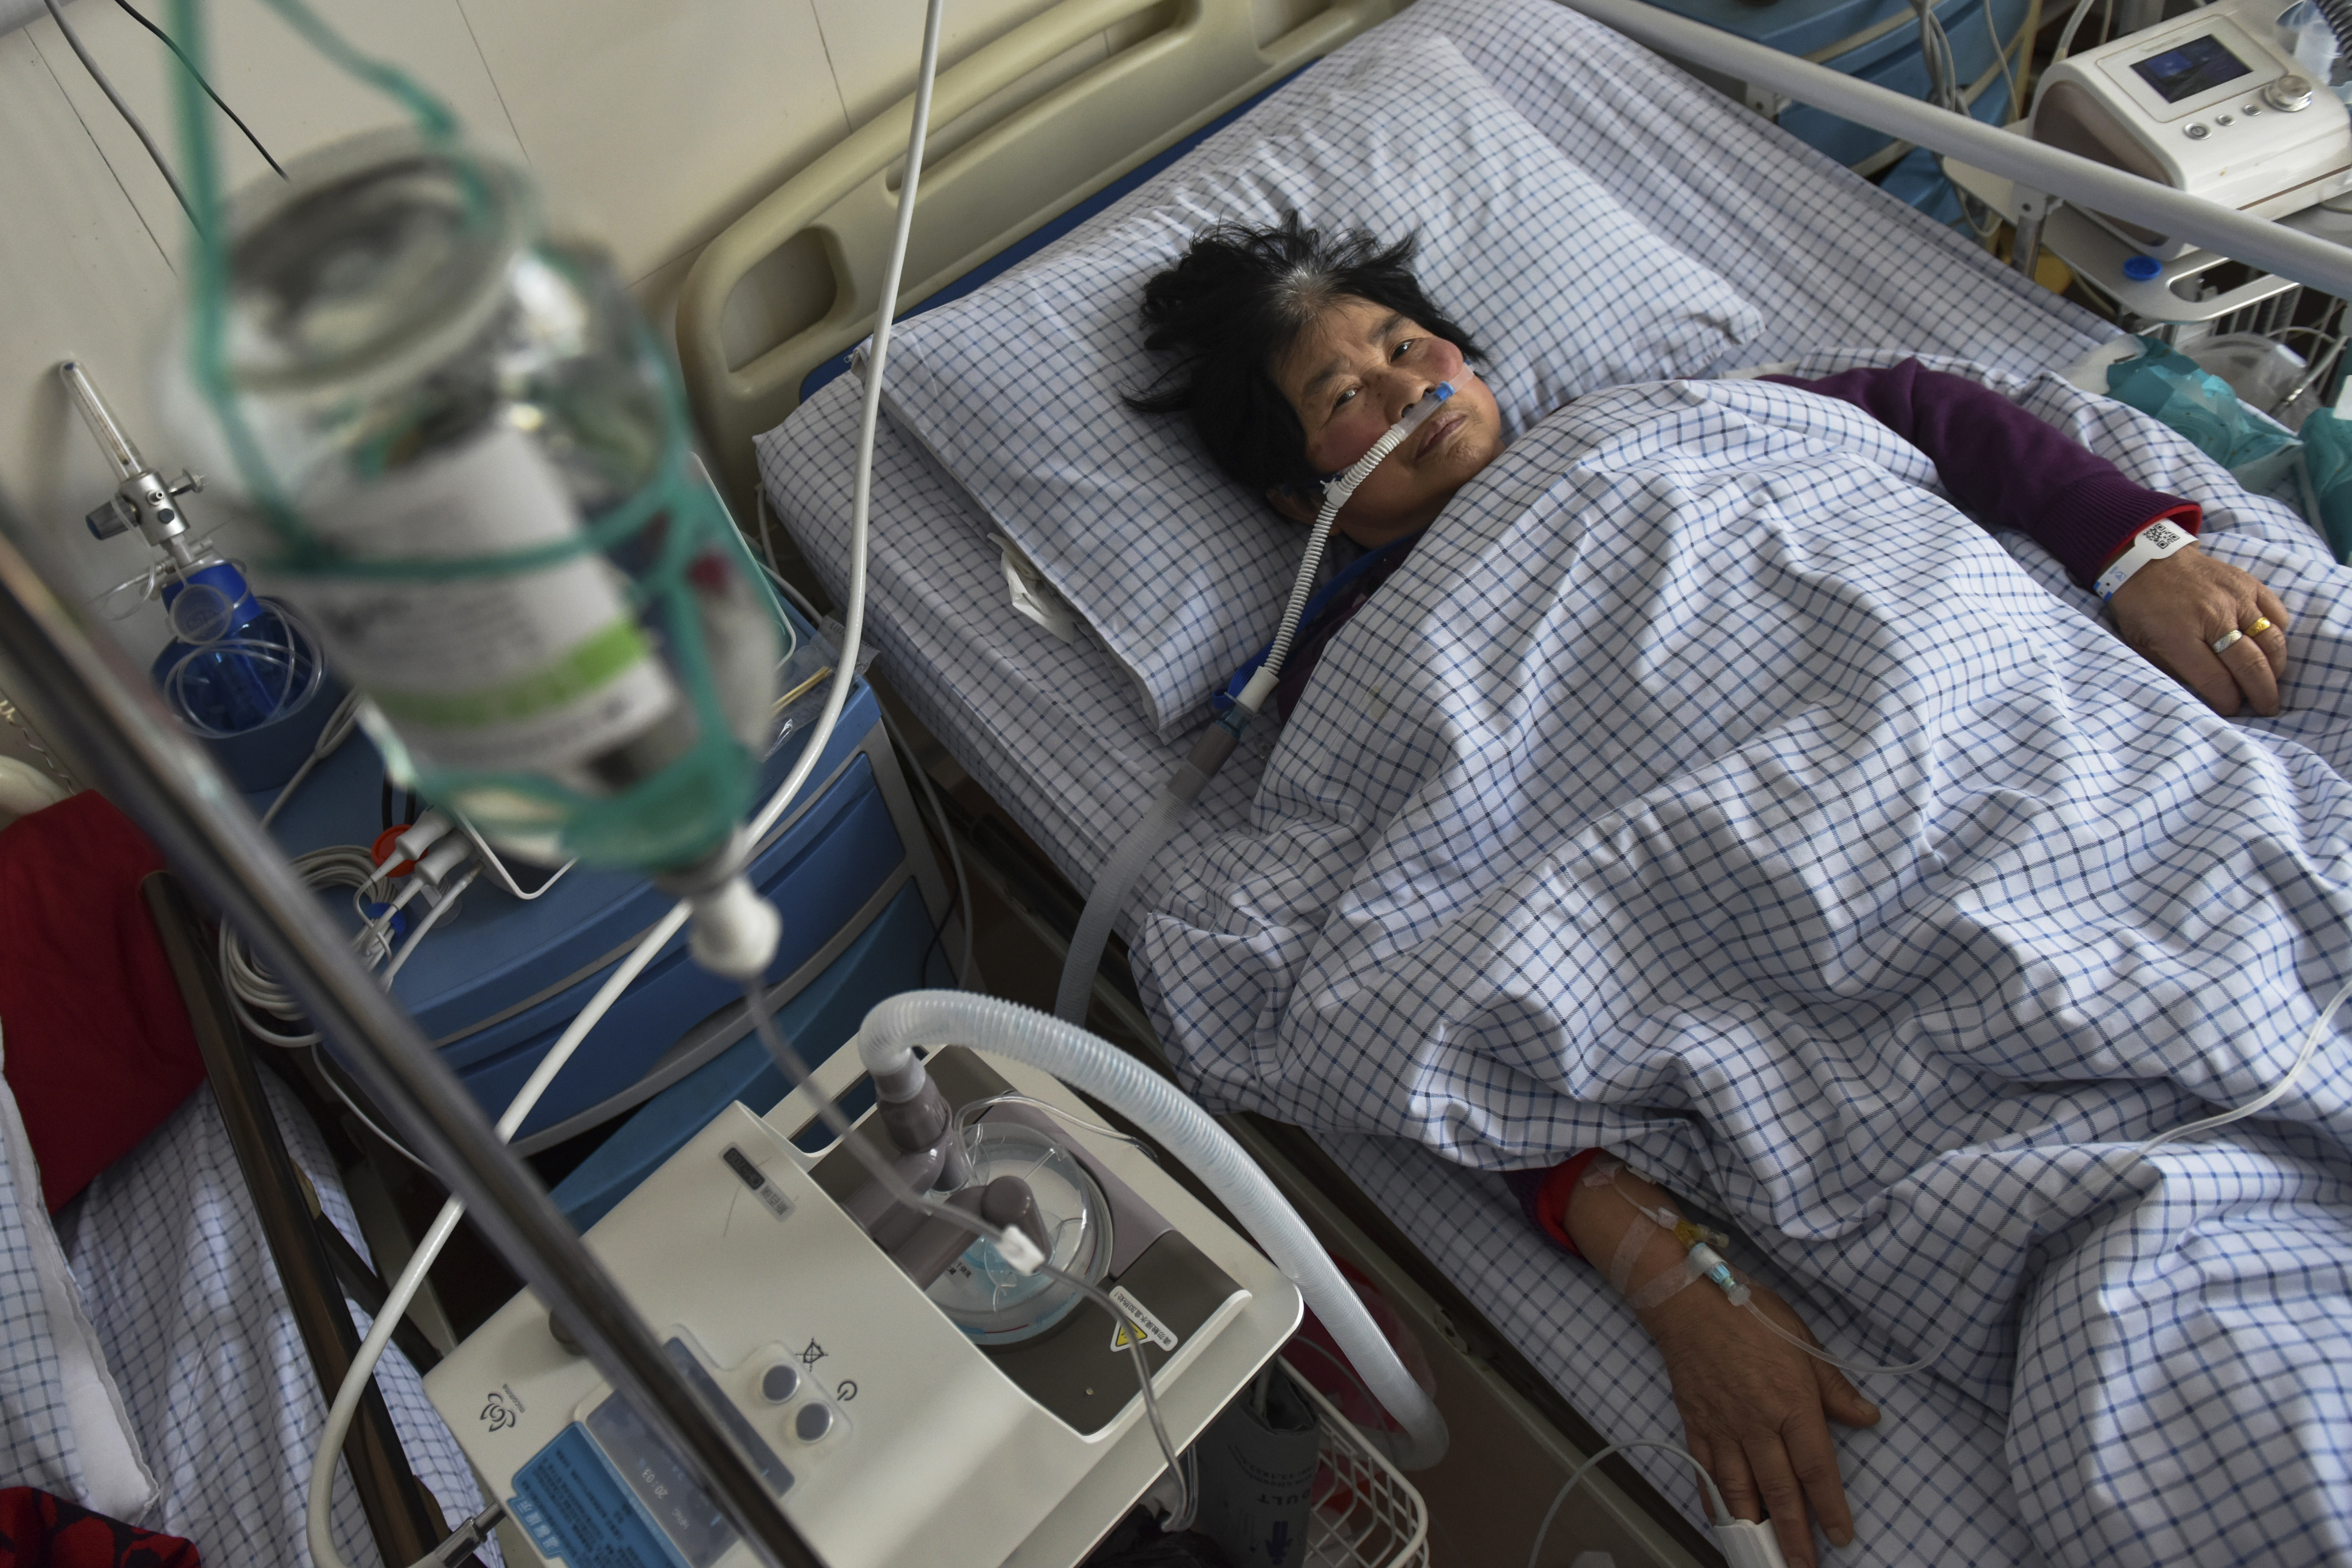 A woman with COVID symptoms receives an intravenous drip while using a ventilator in the emergency room of a hospital in Fuyang, in the central Chinese province of Anhui (Chinatopix Via AP)